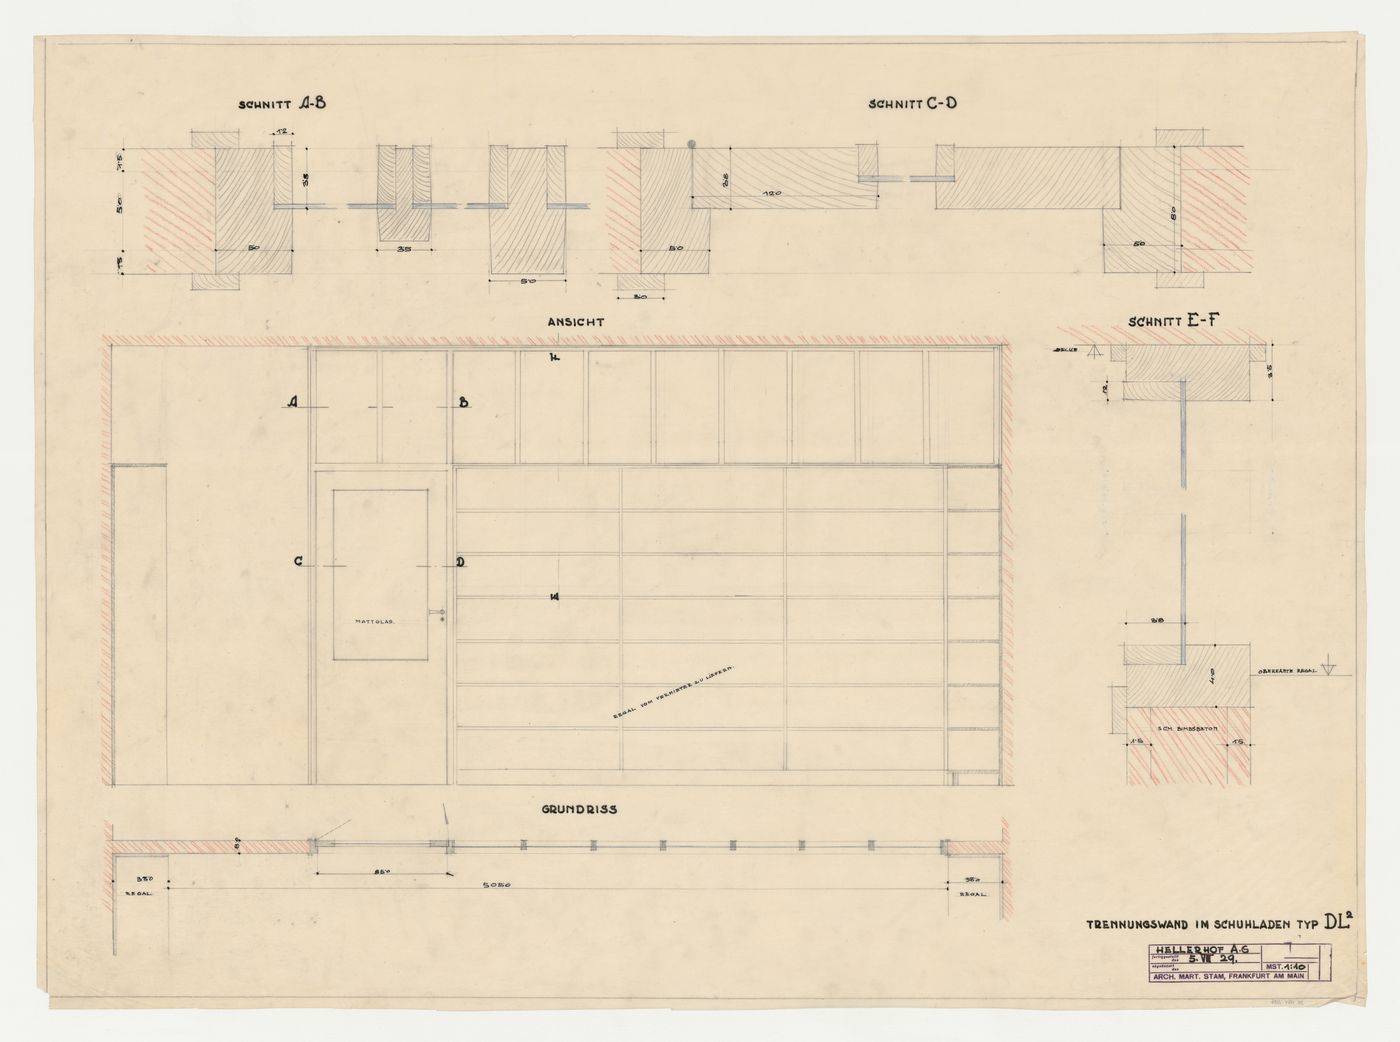 Elevation, plan, and sections for a partition wall for a type DL2 shoemaker store, Hellerhof Housing Estate, Frankfurt am Main, Germany